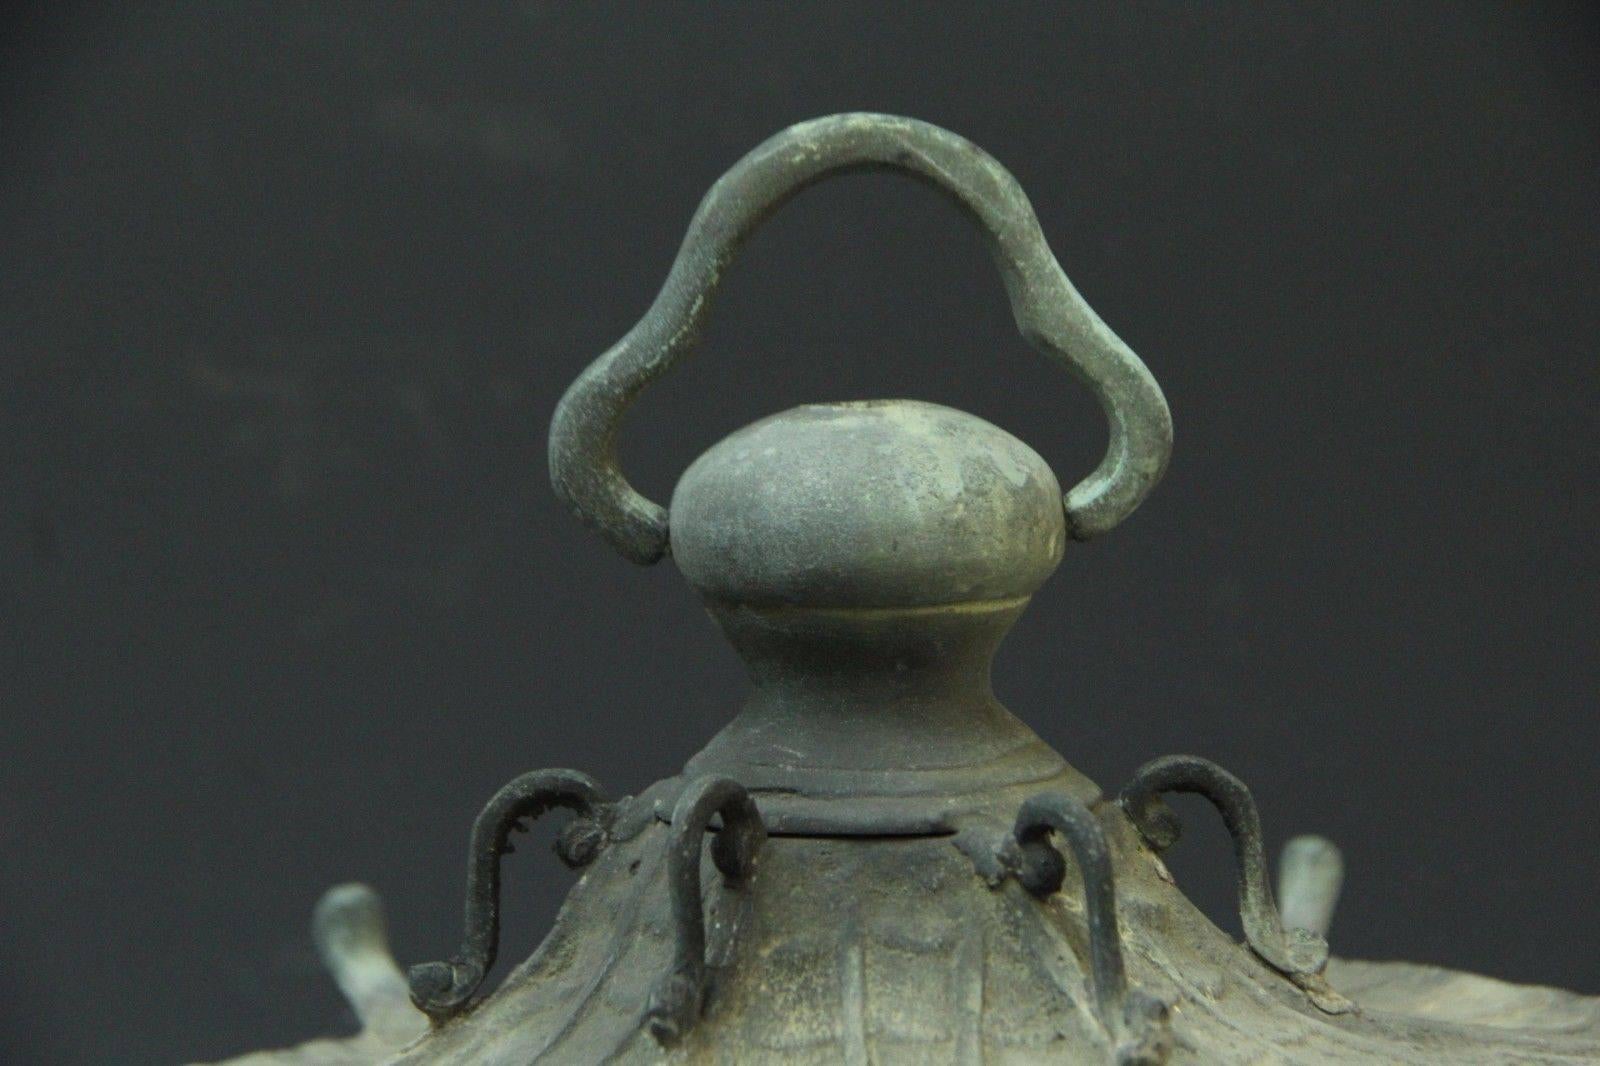 Japanese Japan Antique Bronze Lantern, Good Choice for Your Roof Top or Tea Garden